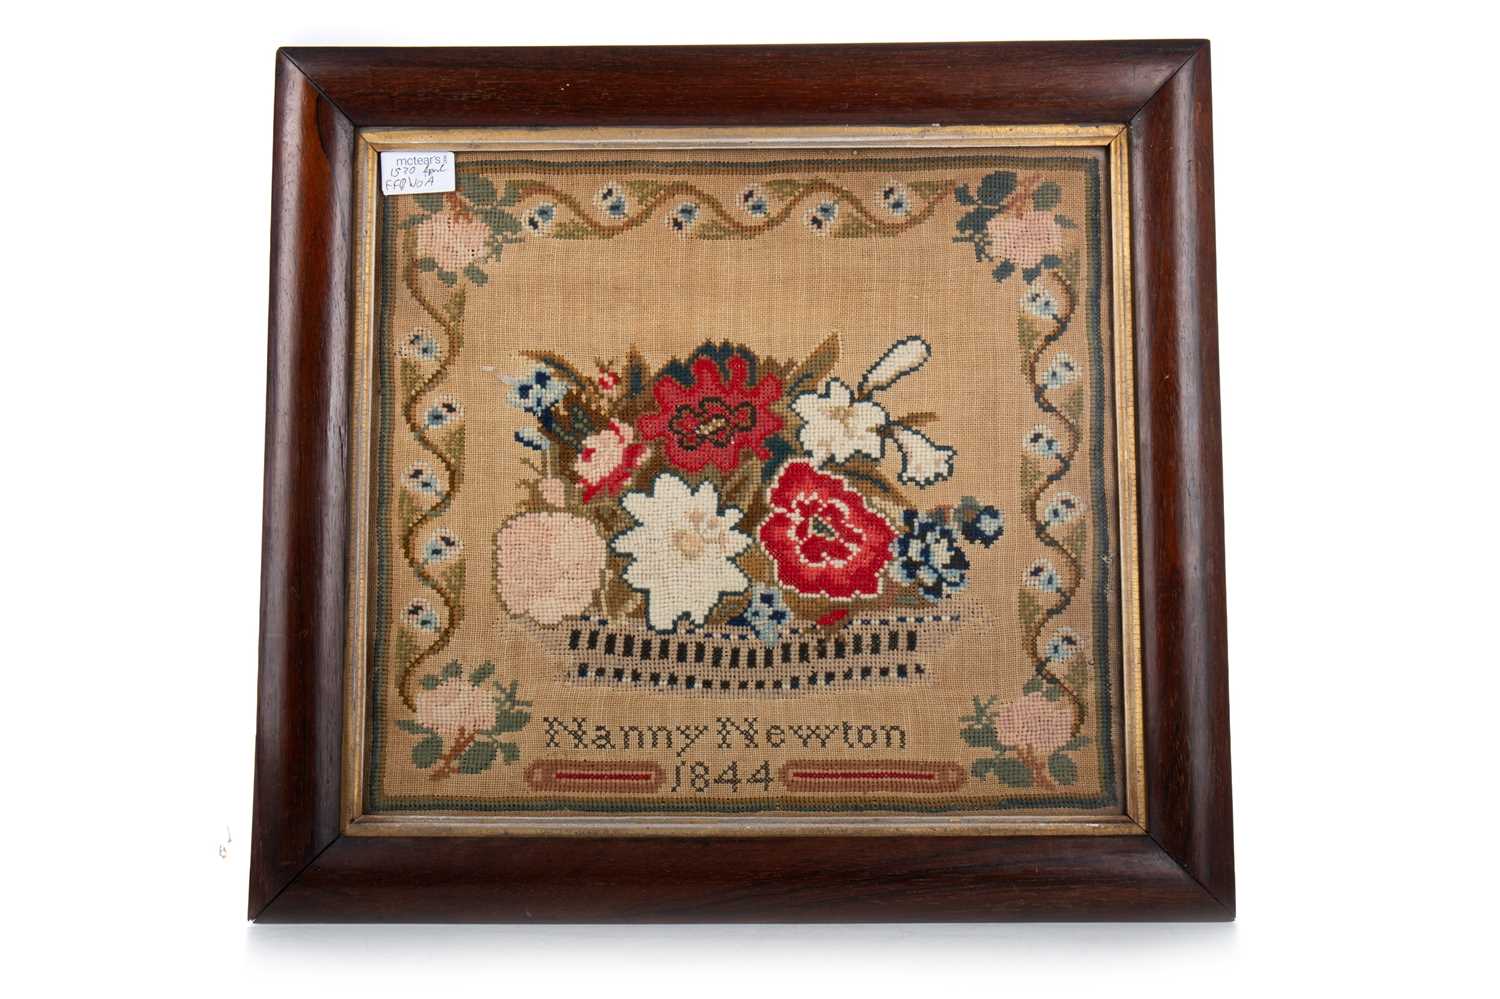 VICTORIAN NEEDLEWORK EMBROIDERY, AND A RELATED VICTORIAN NEEDEWORK SAMPLER